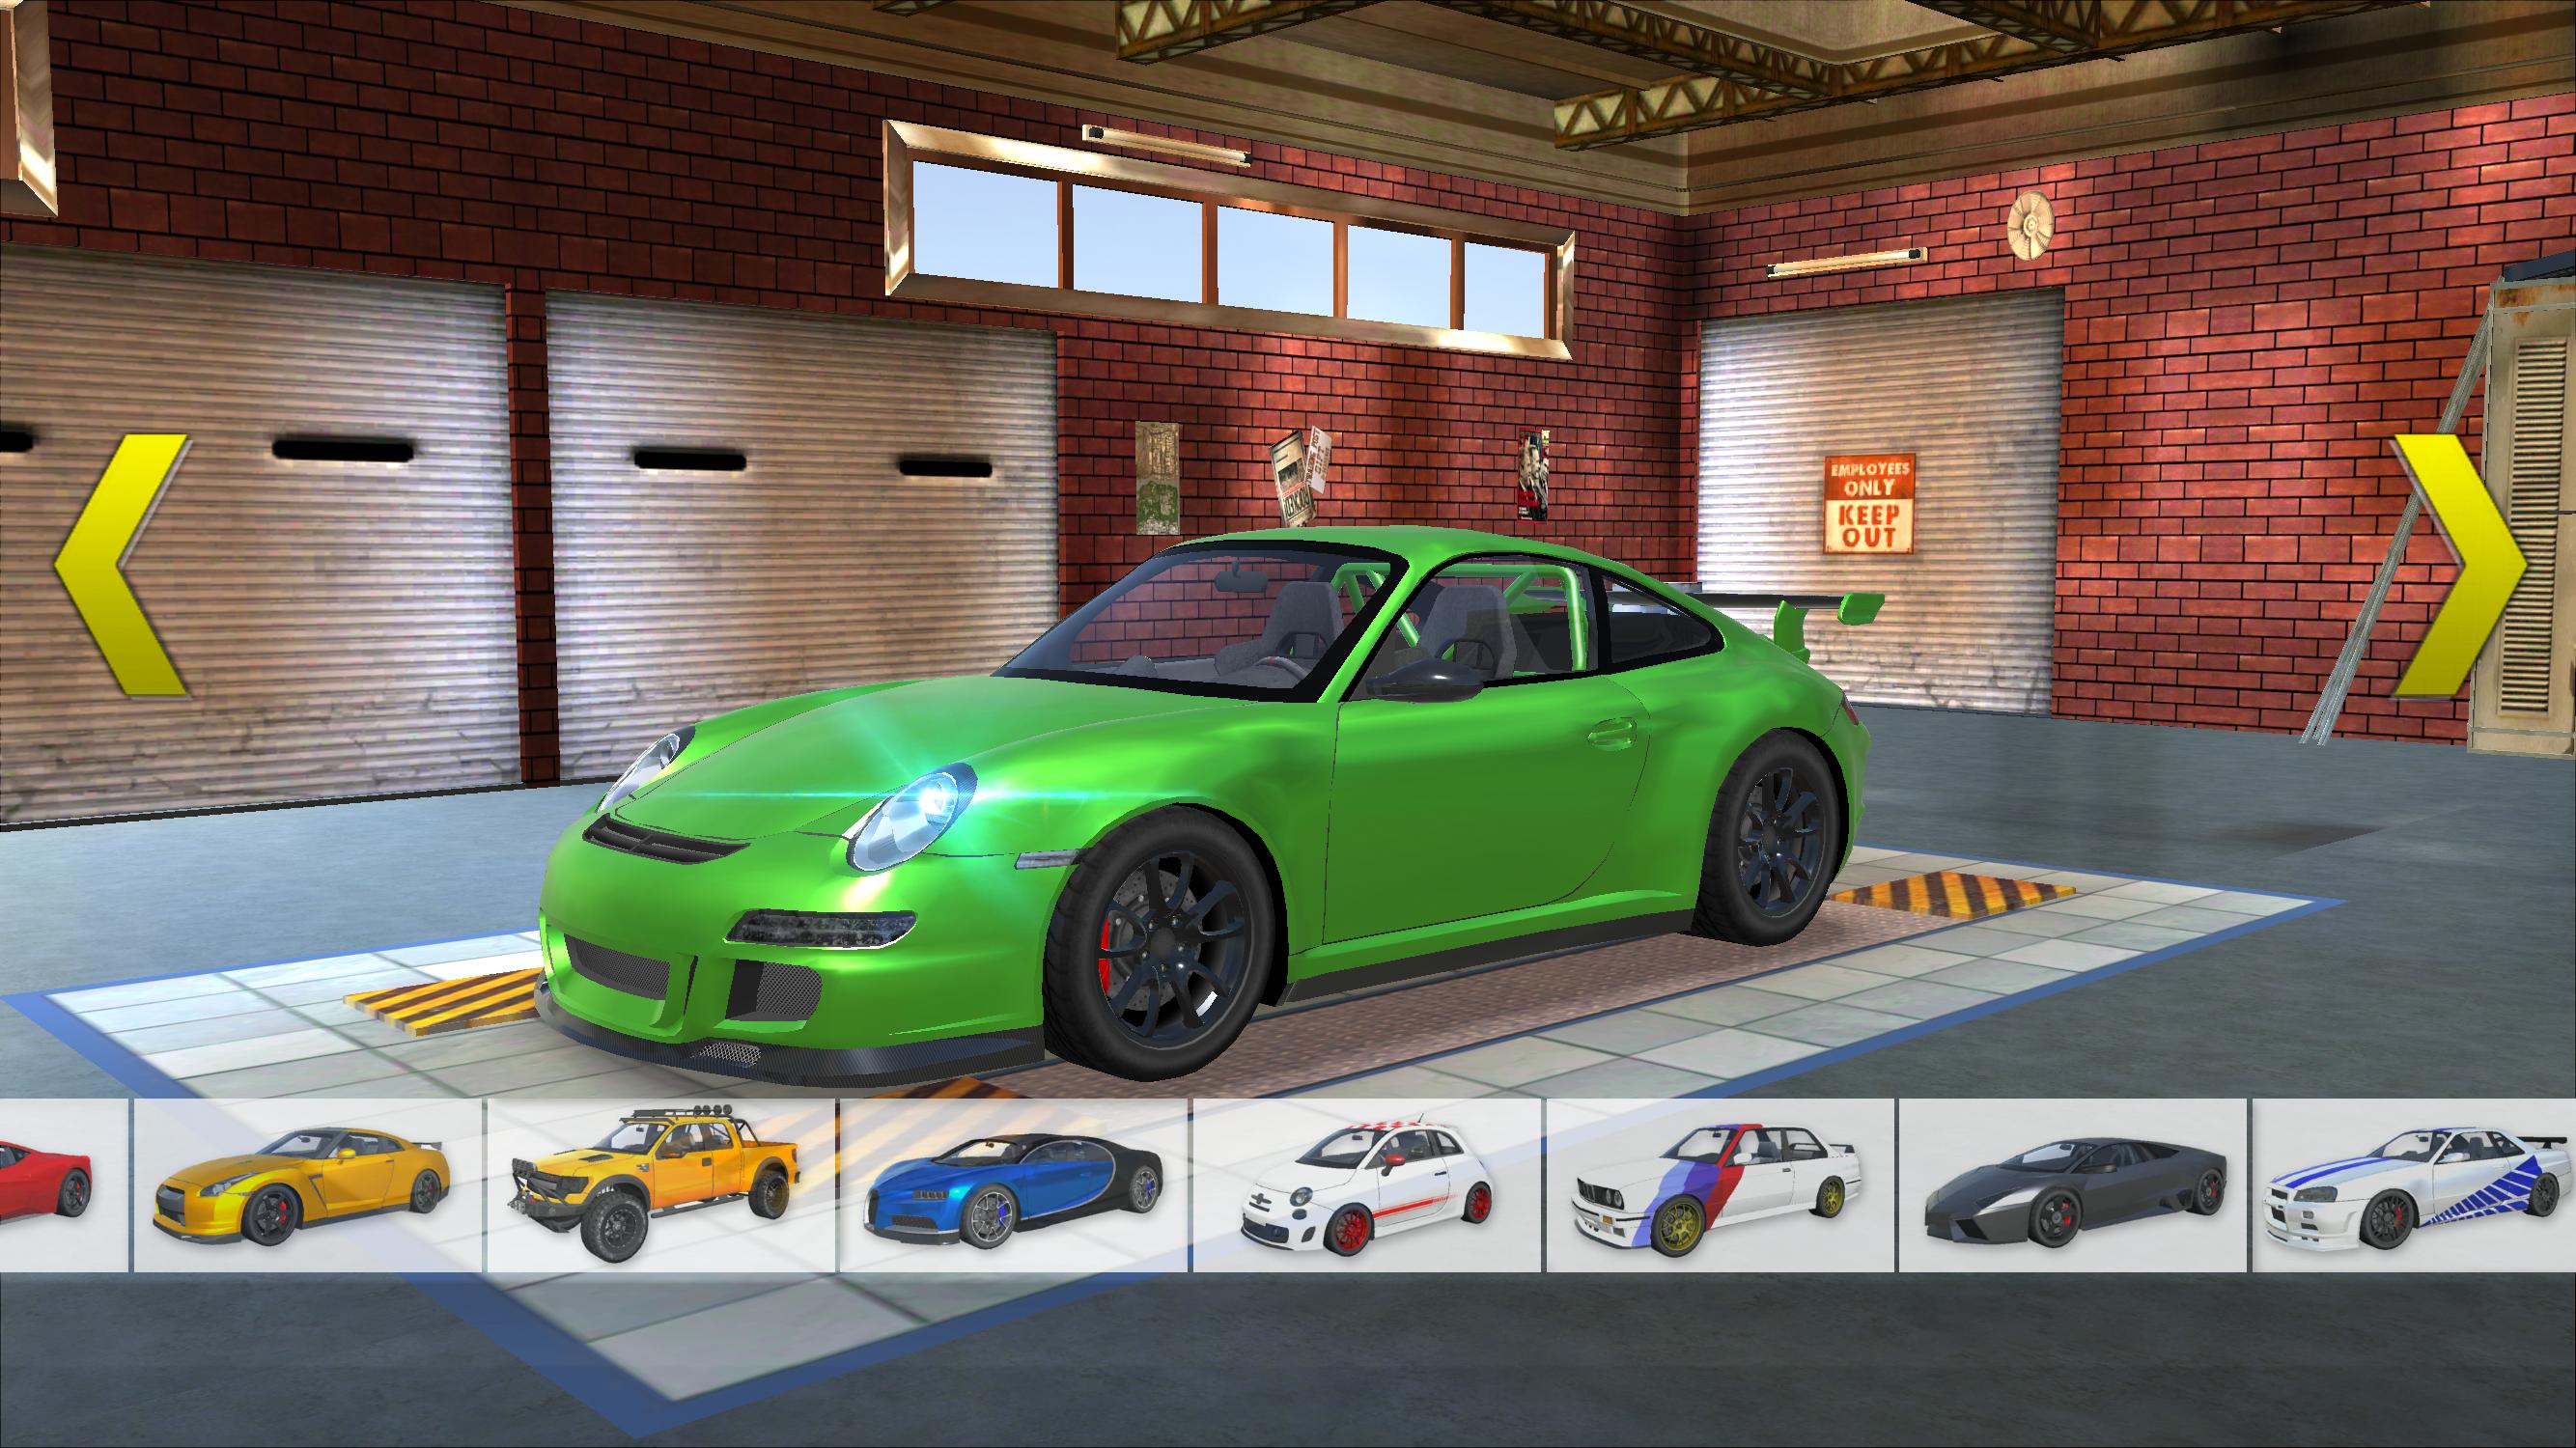 Drive It Like You Stole It for Android - APK Download